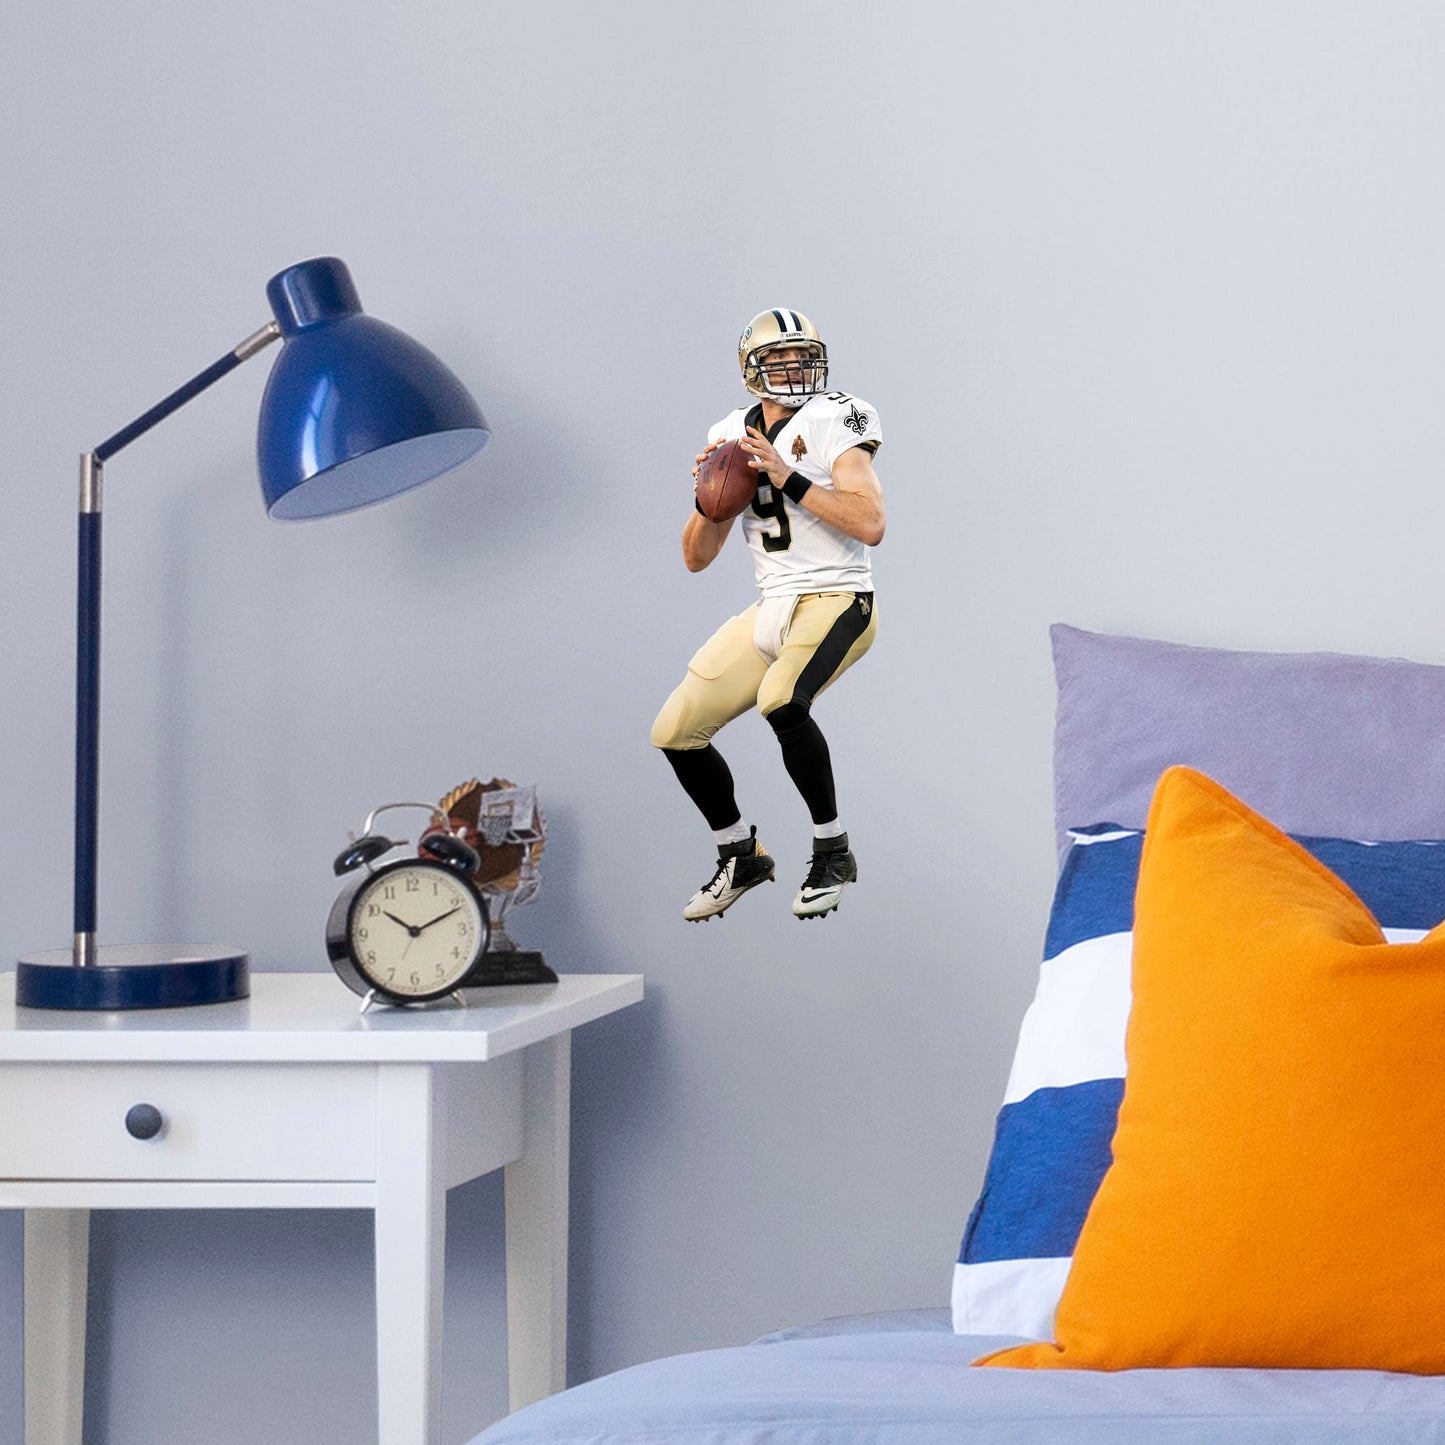 Large Athlete + 1 Decals (7"W x 17"H) Let your favorite Saints quarterback go marching in your man cave, sports bar, or training space with this durable Drew Brees vinyl wall decal. The MVP of Super Bowl XLIV and one of the greatest quarterbacks of all time, Brees is a player you'll be proud to display in your personal Superdome. Should you call an audible and need to relocate, the high-quality decal is easy to remove and display in a new space.